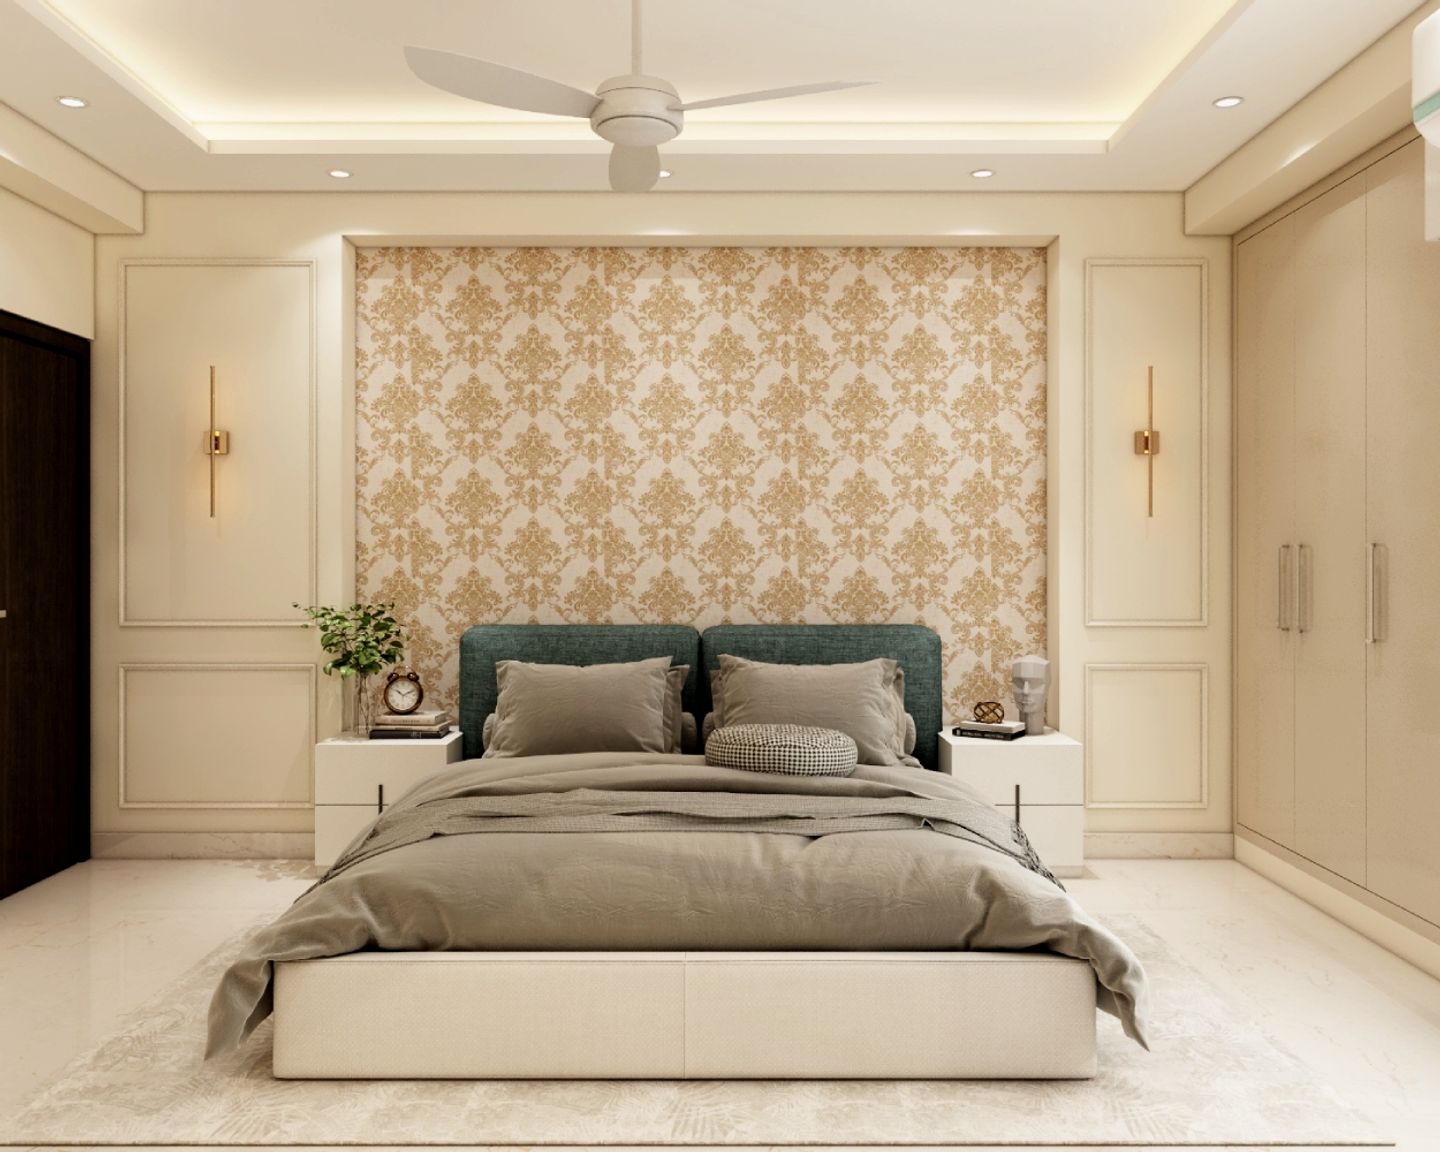 Cream And Beige Wall Design With Wall Paint, Trims And Ornate Damask Wallpaper - Livspace